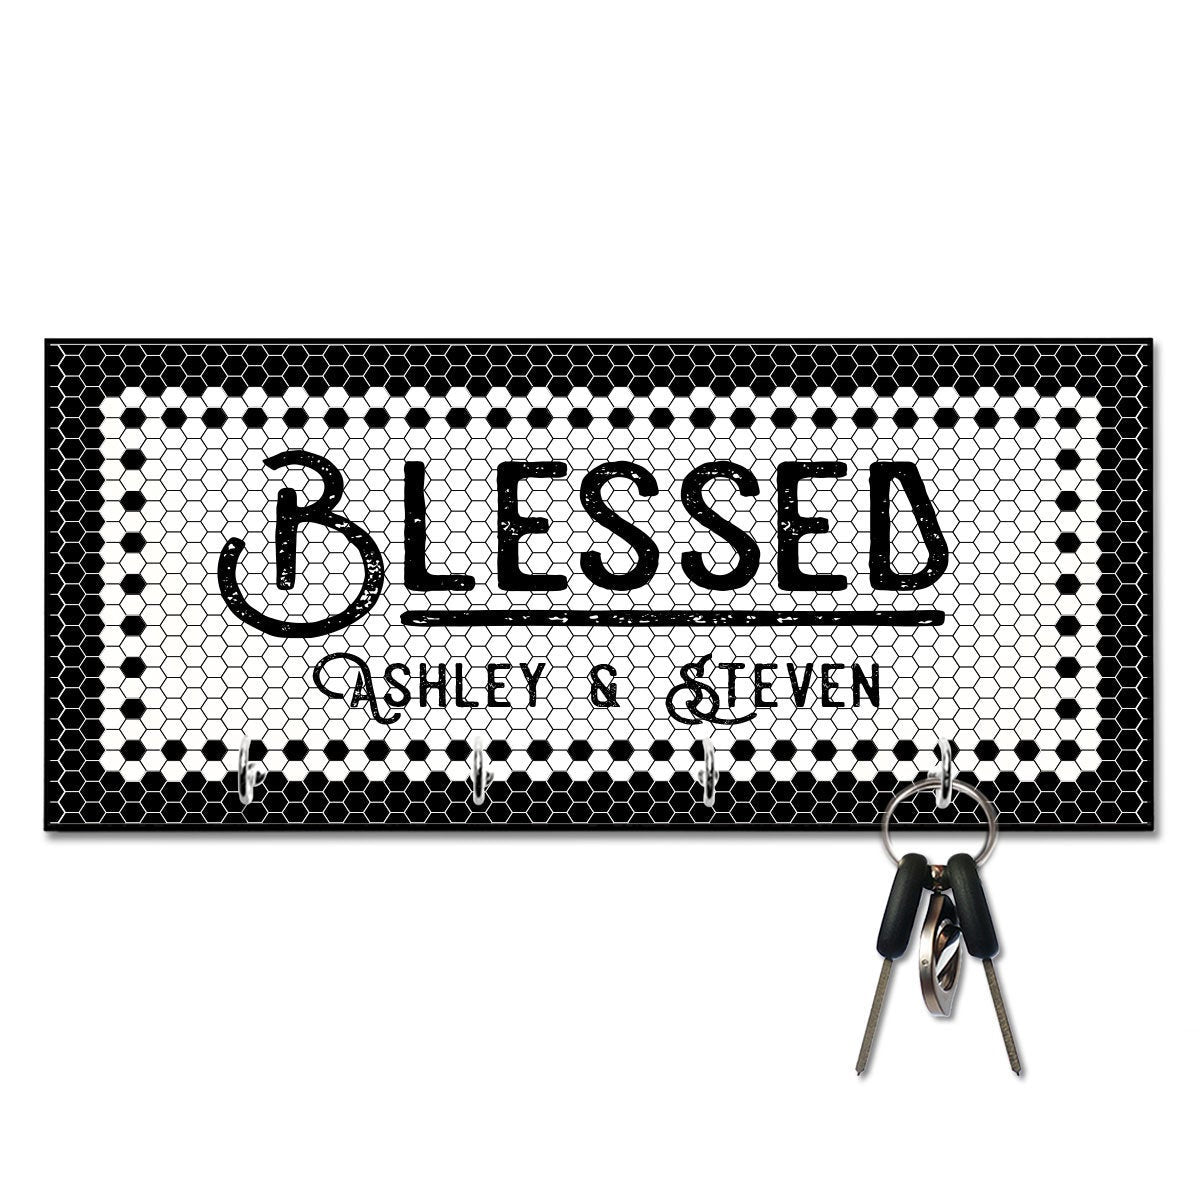 Personallized Black and White Tile Look Look - Blessed - Key Hanger